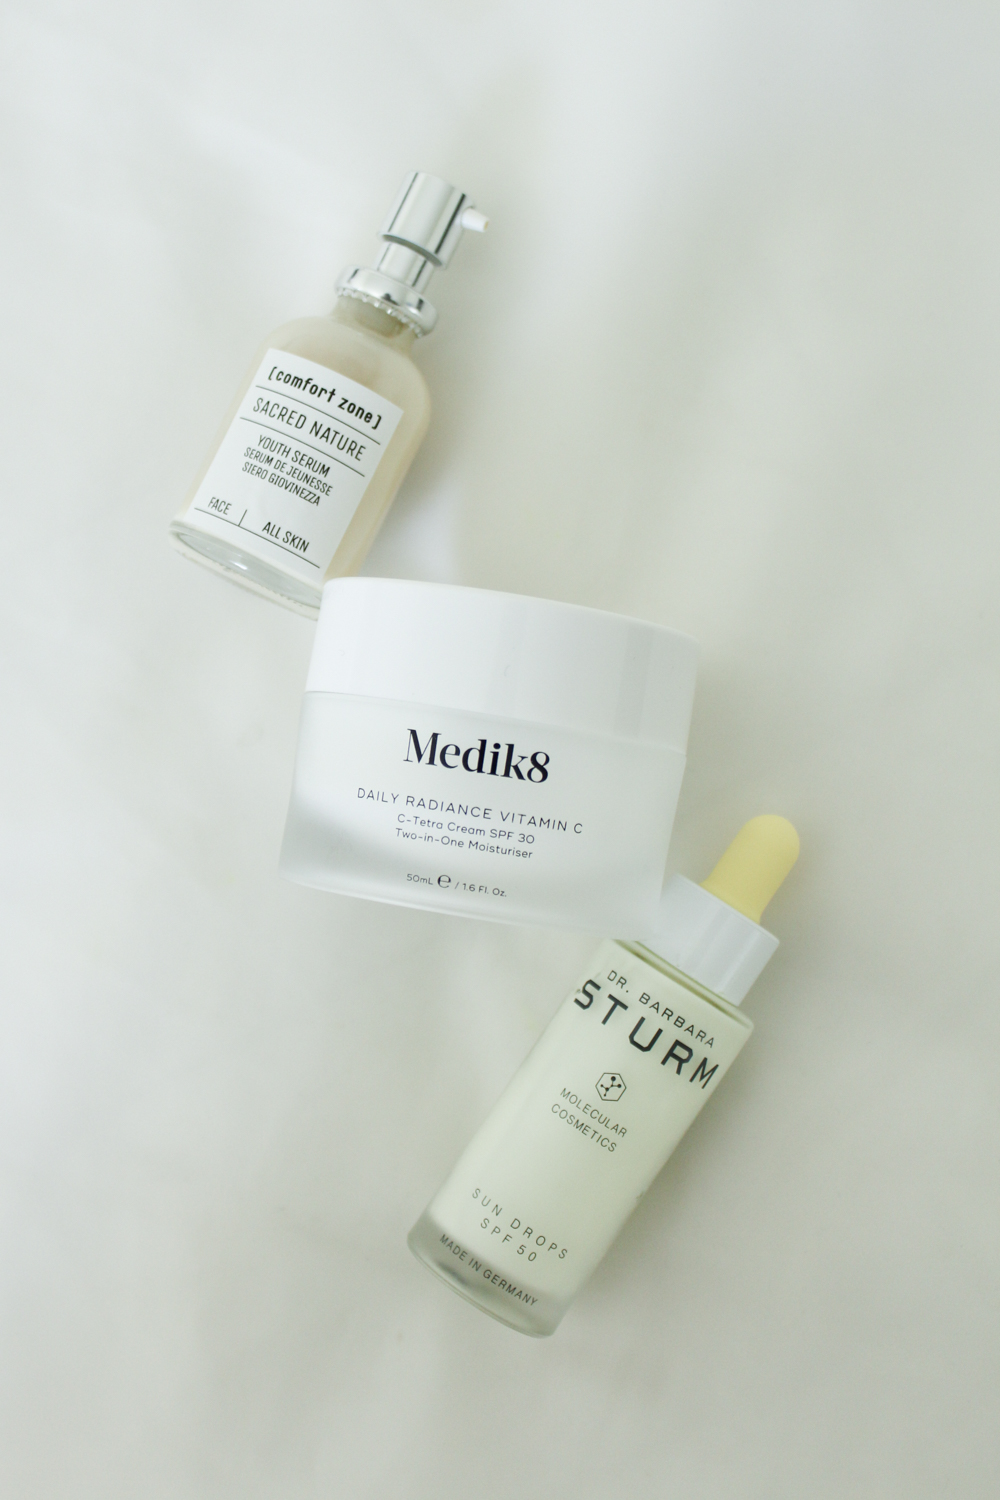 Three summer skincare products